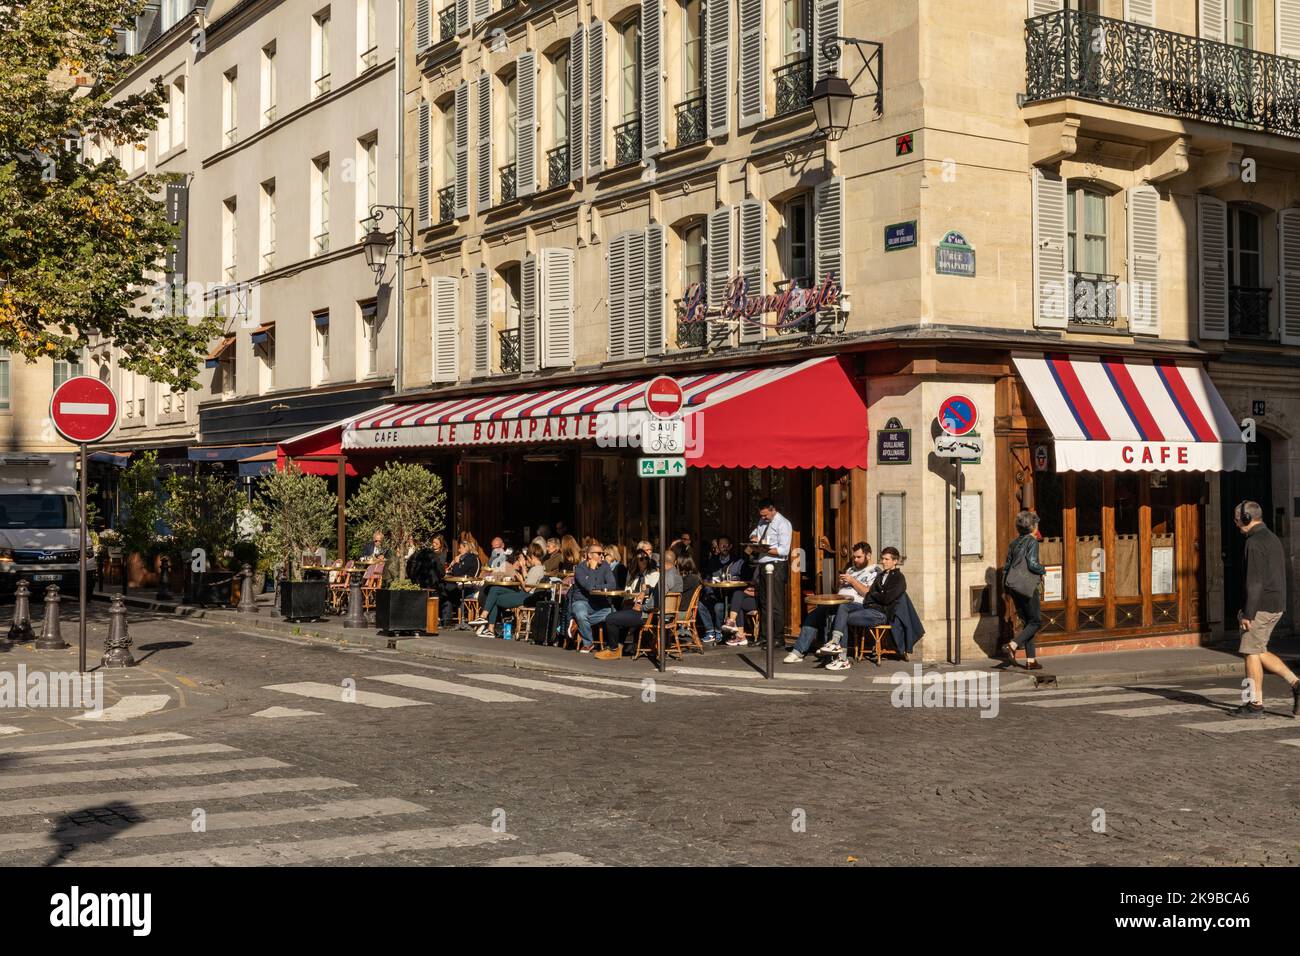 Cafe on Streets of Paris Stock Photo